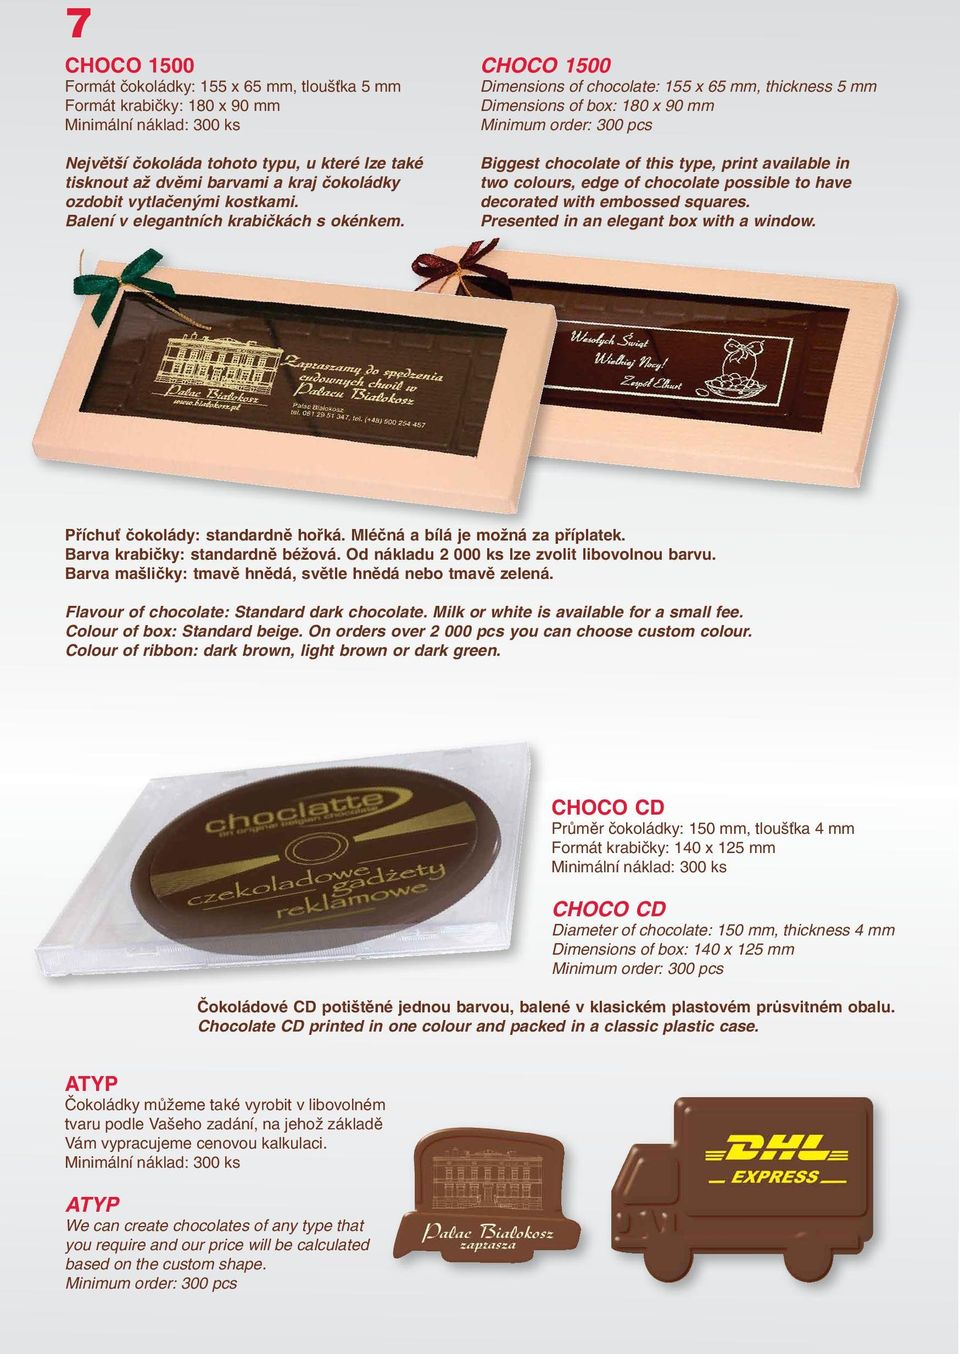 CHOCO 1500 Dimensions of chocolate: 155 x 65 mm, thickness 5 mm Dimensions of box: 180 x 90 mm Biggest chocolate of this type, print available in two colours, edge of chocolate possible to have